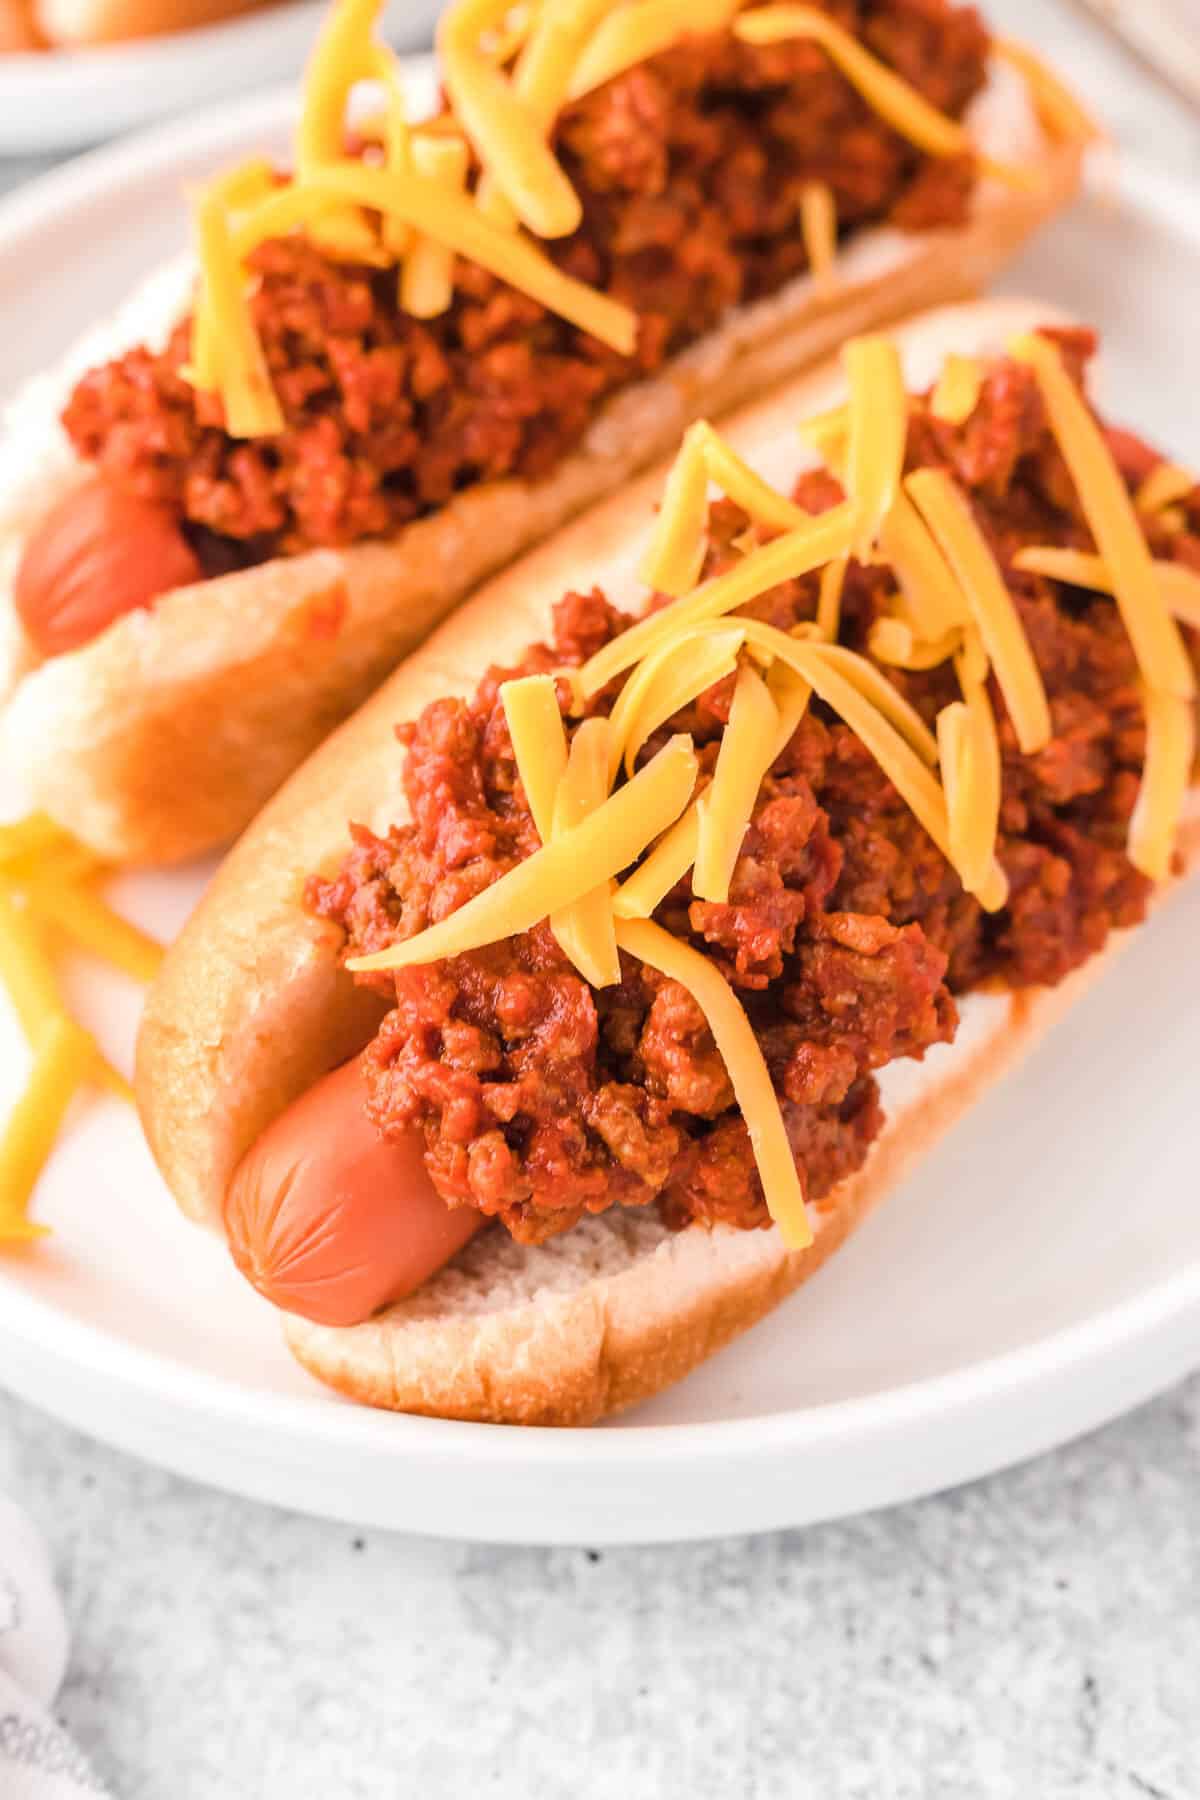 Two hot dogs topped with the chili sauce and cheese.